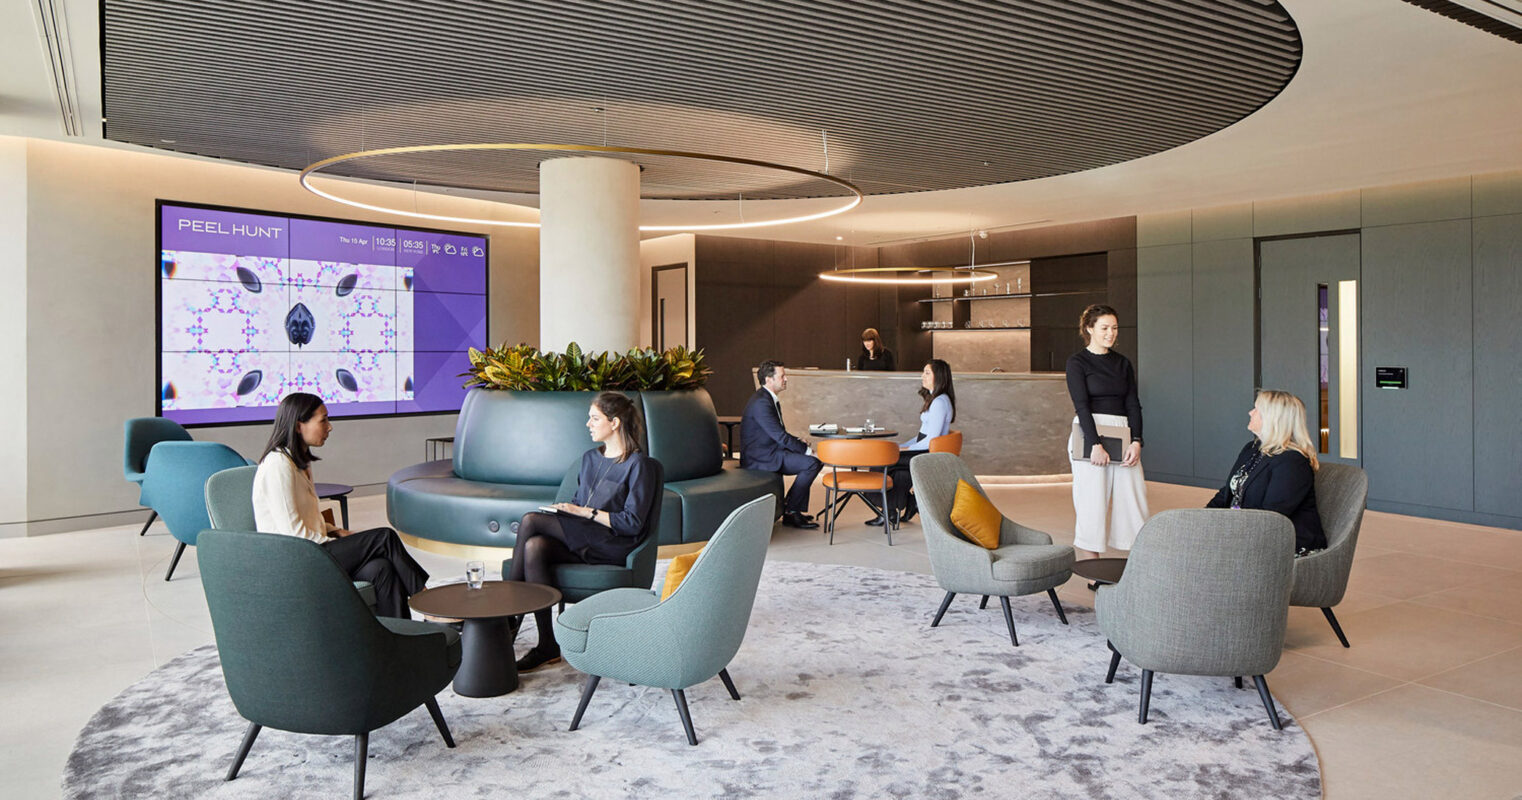 Modern office lounge with curved, modular seating in teal and charcoal. A circular ceiling feature complements the furniture's geometry, while a grey patterned rug anchors the space. Individuals engage in discussion, and a digital display animates the backdrop.